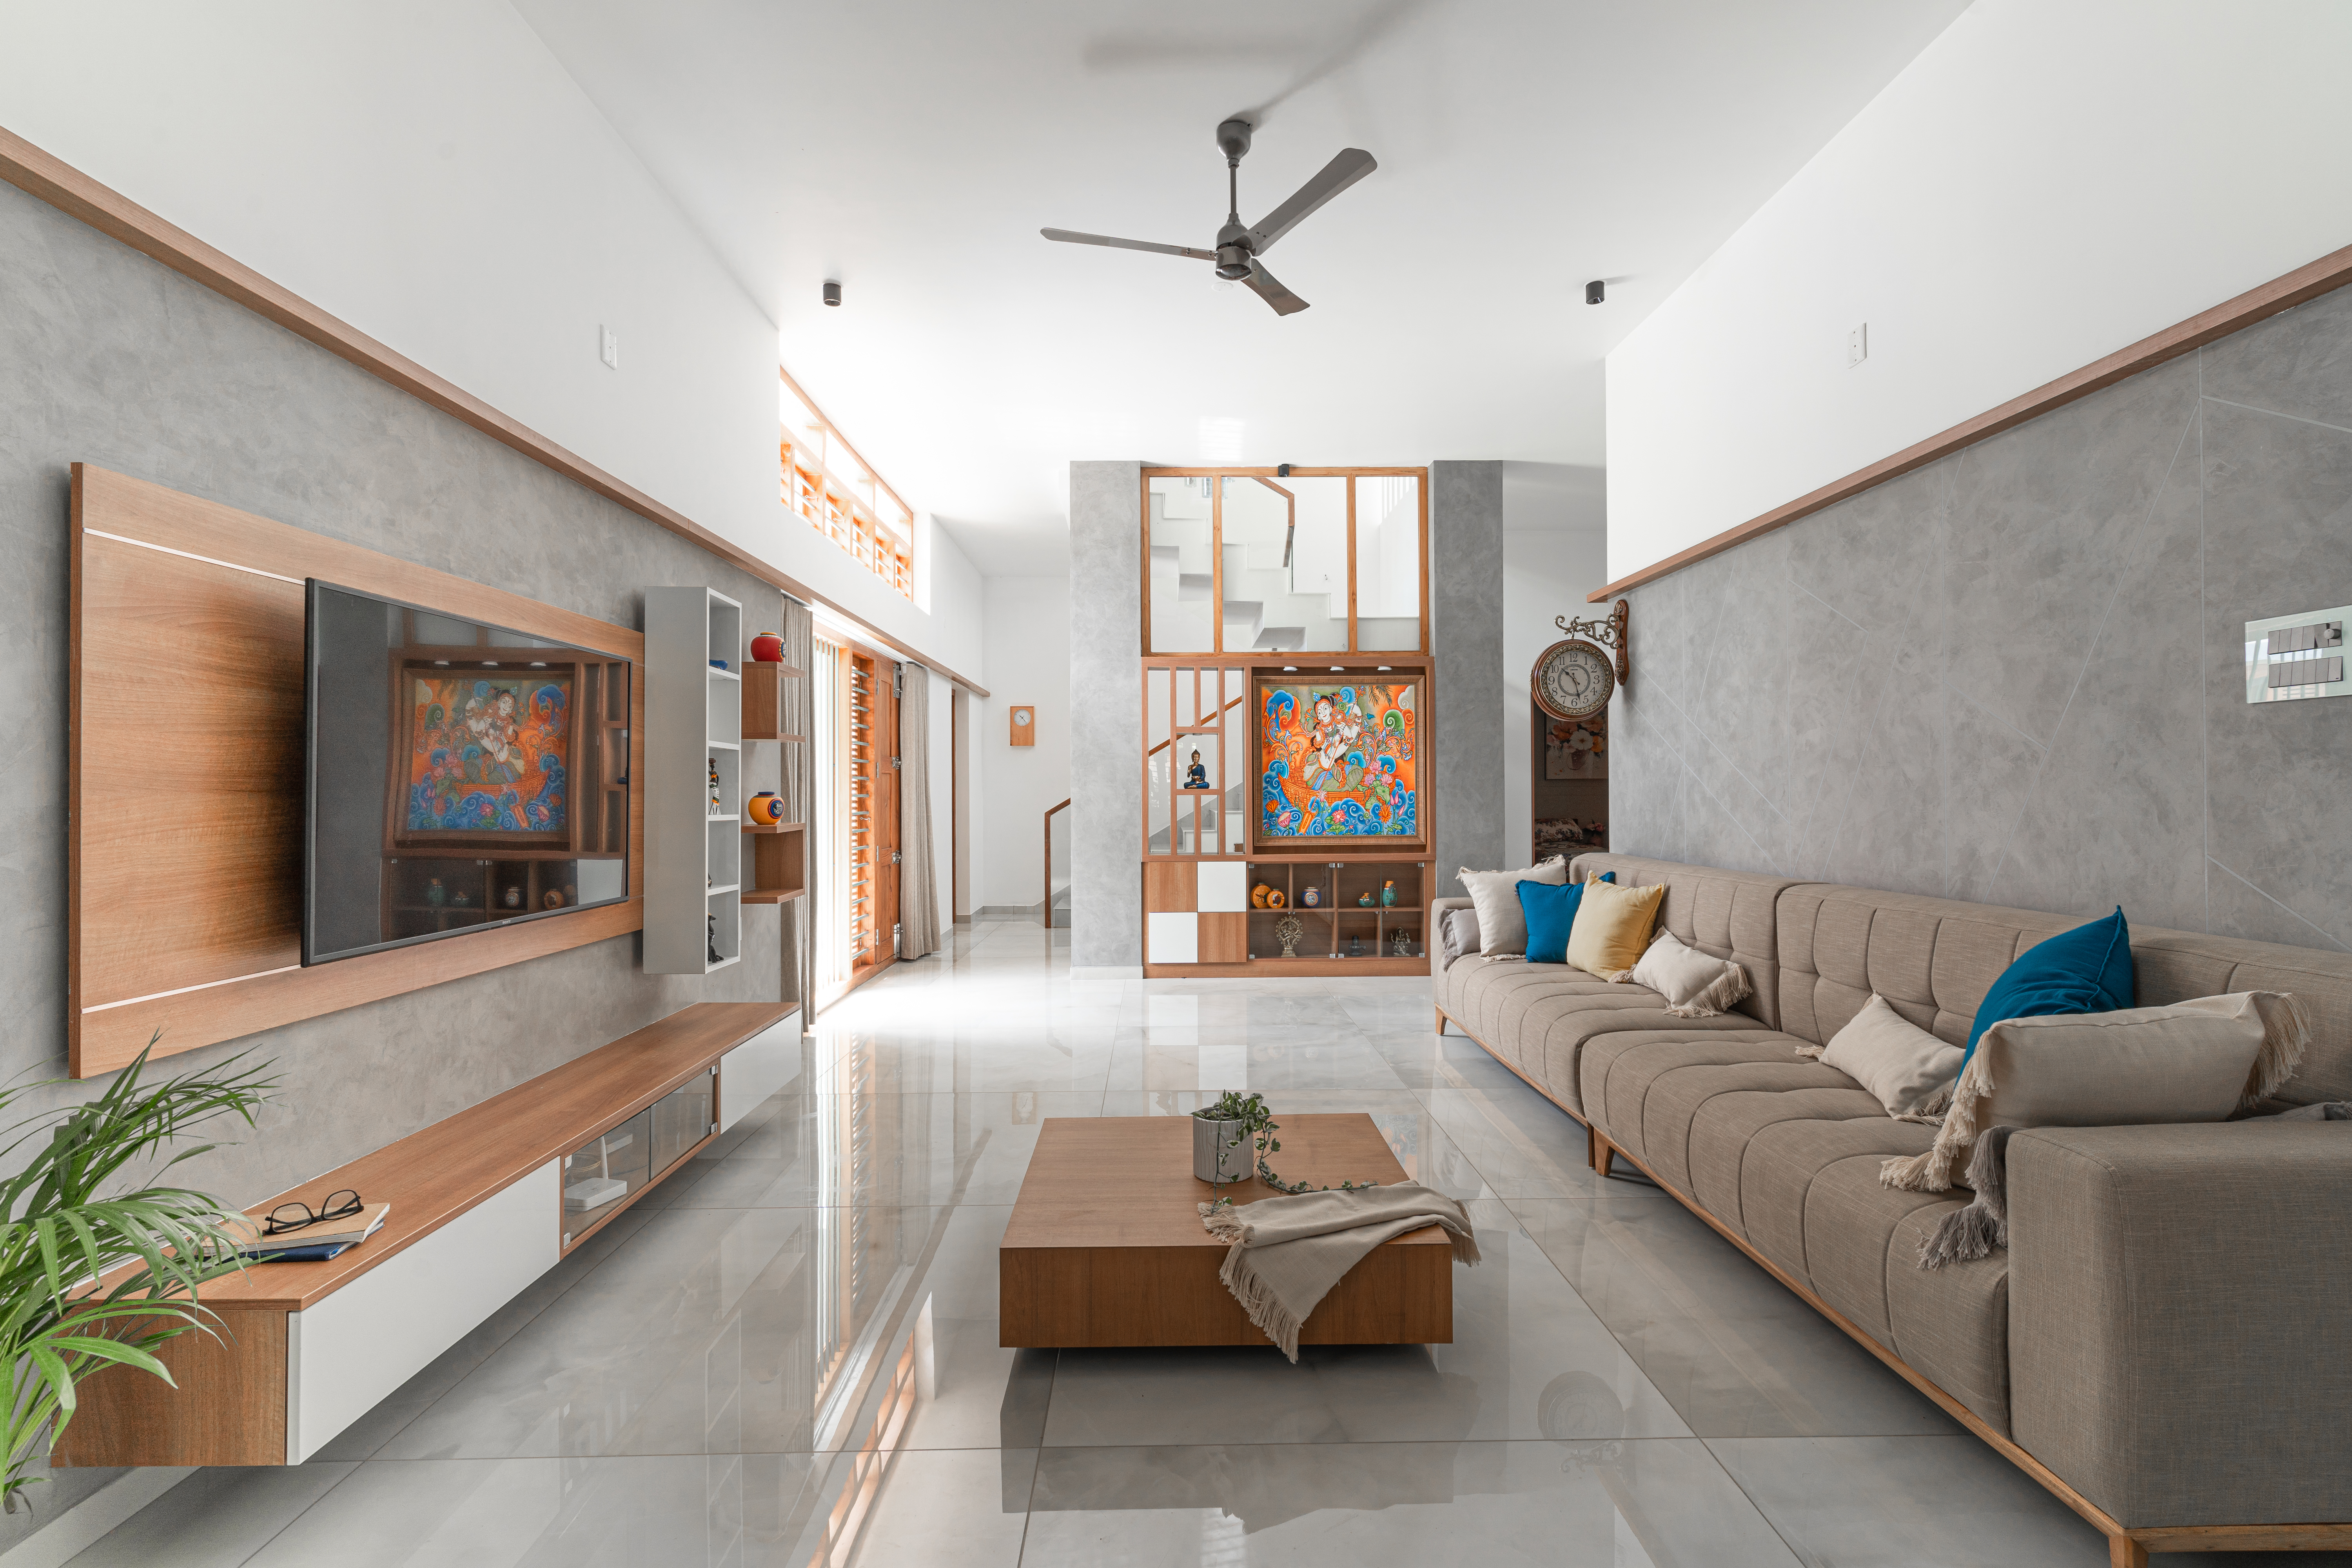  Modern House Designs in Kerala : Explore the perfect blend of tradition and innovation